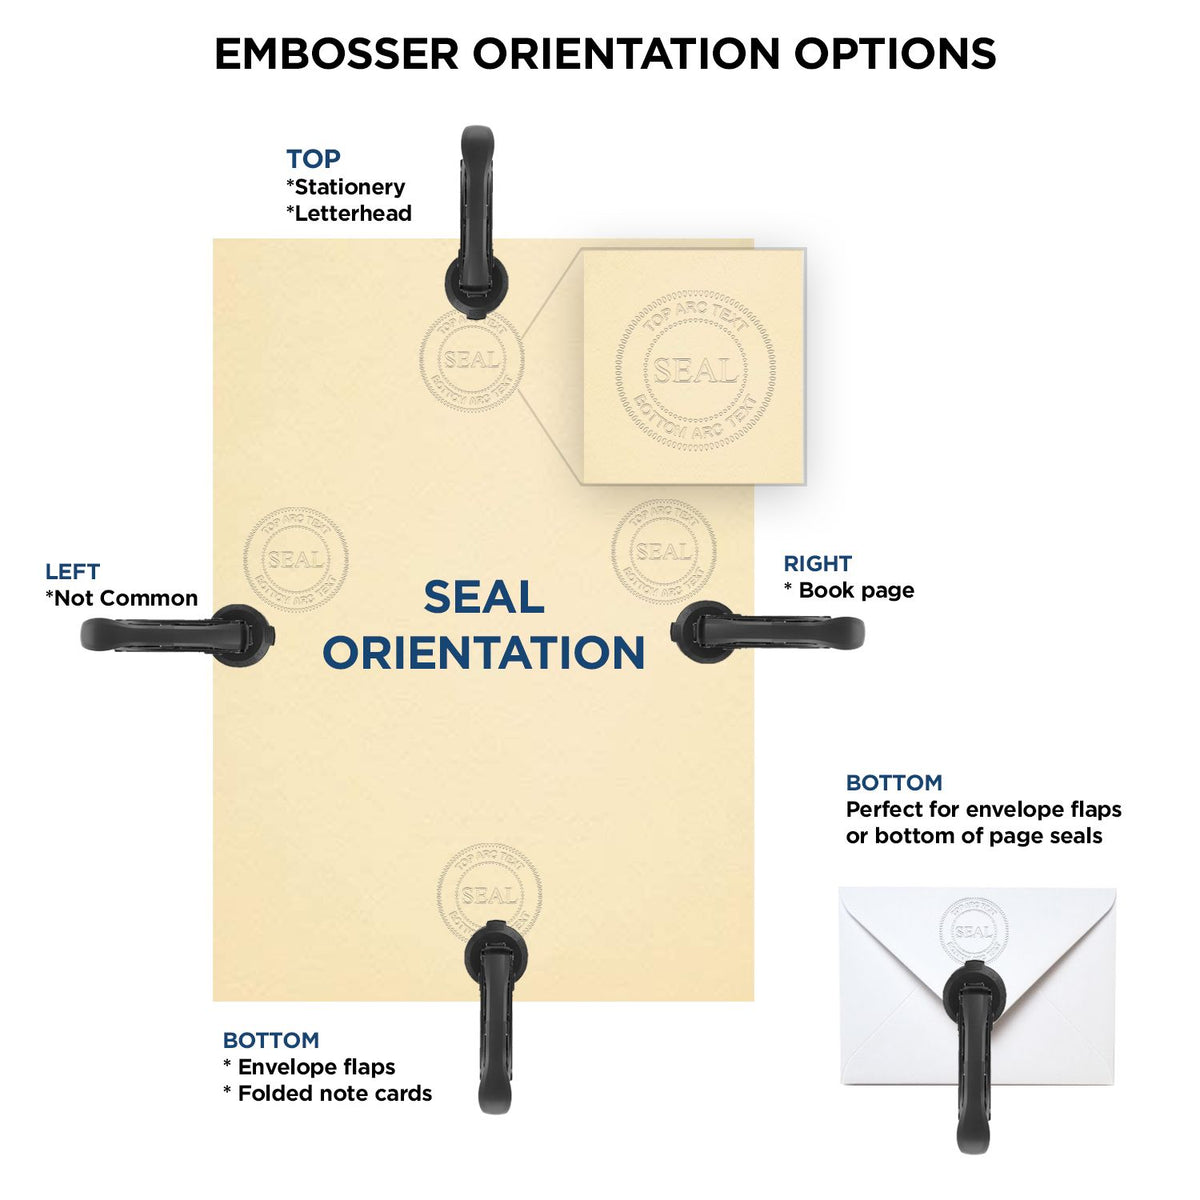 An infographic for the Heavy Duty Cast Iron Iowa Architect Embosser showing embosser orientation, this is showing examples of a top, bottom, right and left insert.